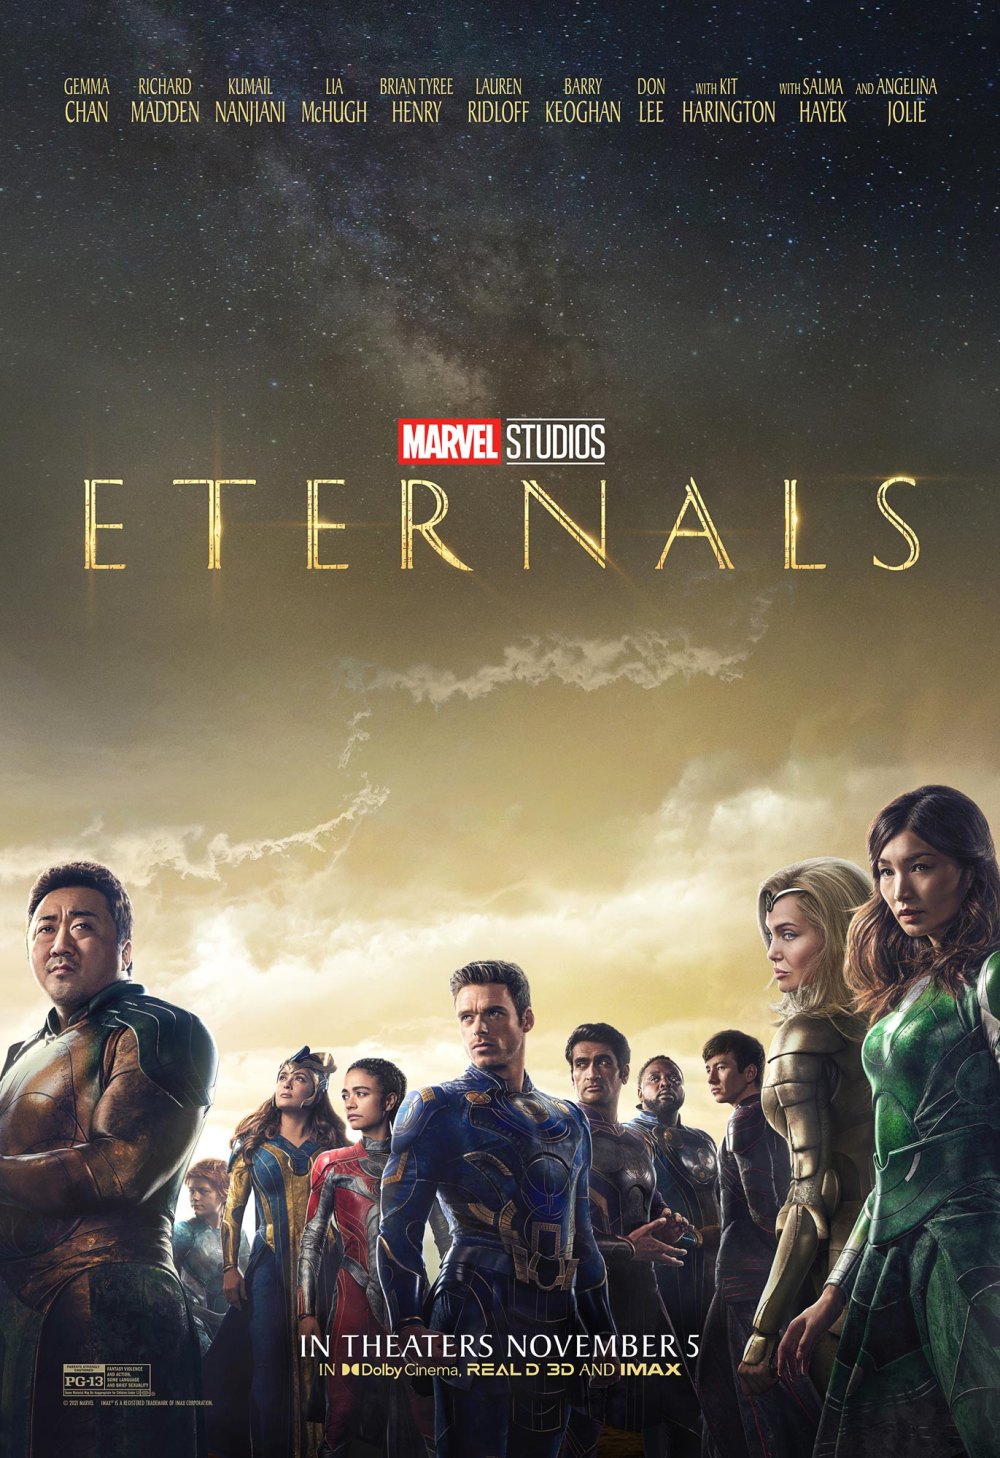 John Ridley Says He Wrote the Good Version’ of Marvel’s Eternals’ as a TV Series That Got Scrapped 753